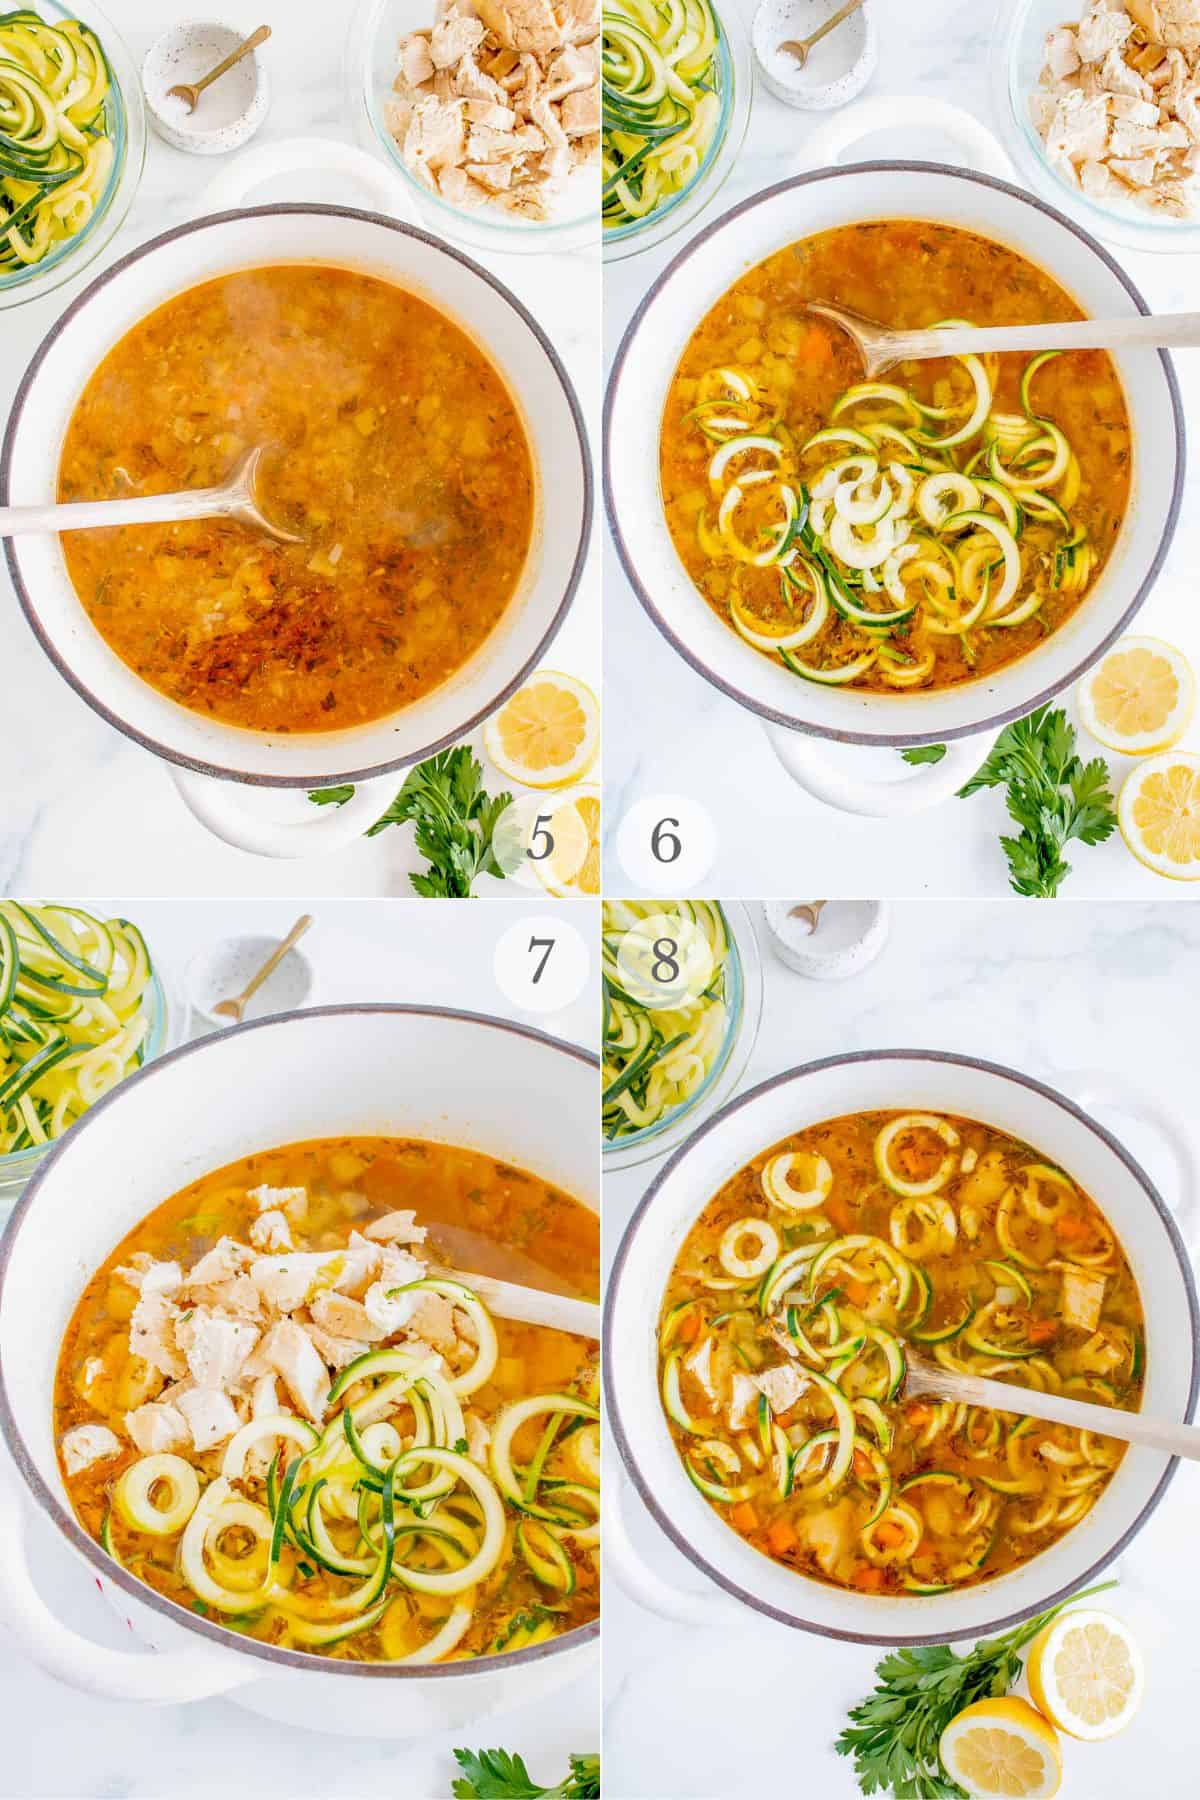 chicken zoodle soup recipe steps 5-8.